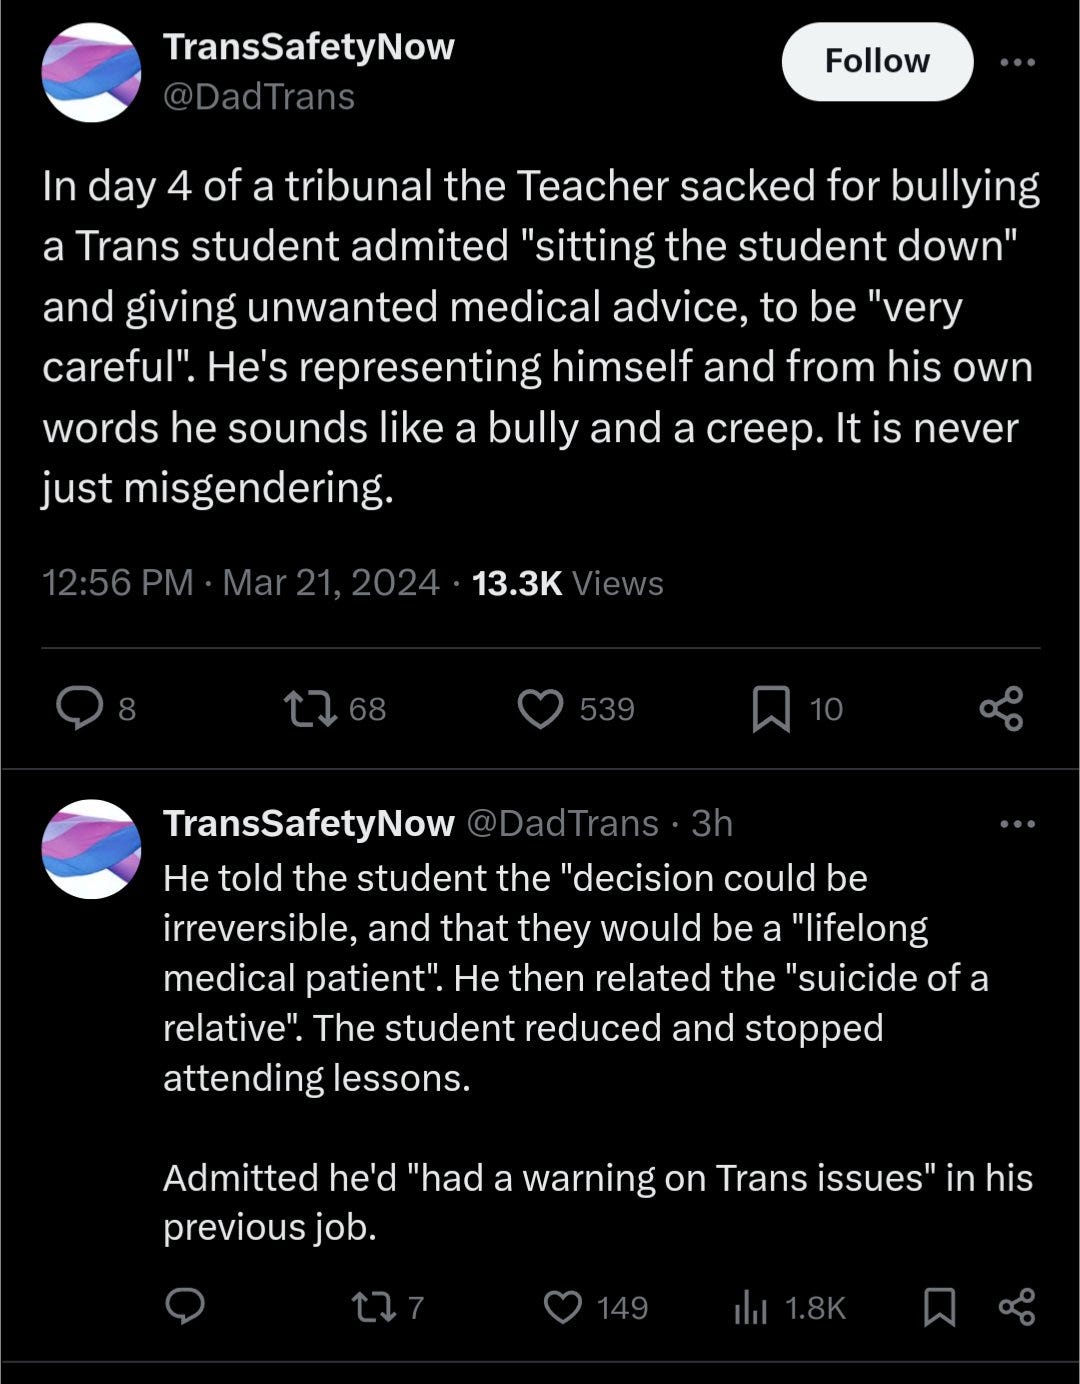 The image contains two tweets from the account TransSafetyNow (@DadTrans). The first tweet reads: "In day 4 of a tribunal the Teacher sacked for bullying a Trans student admitted "sitting the student down" and giving unwanted medical advice, to be "very careful". He's representing himself and from his own words he sounds like a bully and a creep. It is never just misgendering. 12:56 PM · Mar 21, 2024 · 13.3K Views" The second tweet reads: "He told the student the "decision could be irreversible, and that they would be a "lifelong medical patient". He then related the "suicide of a relative". The student reduced and stopped attending lessons. Admitted he'd "had a warning on Trans issues" in his previous job."